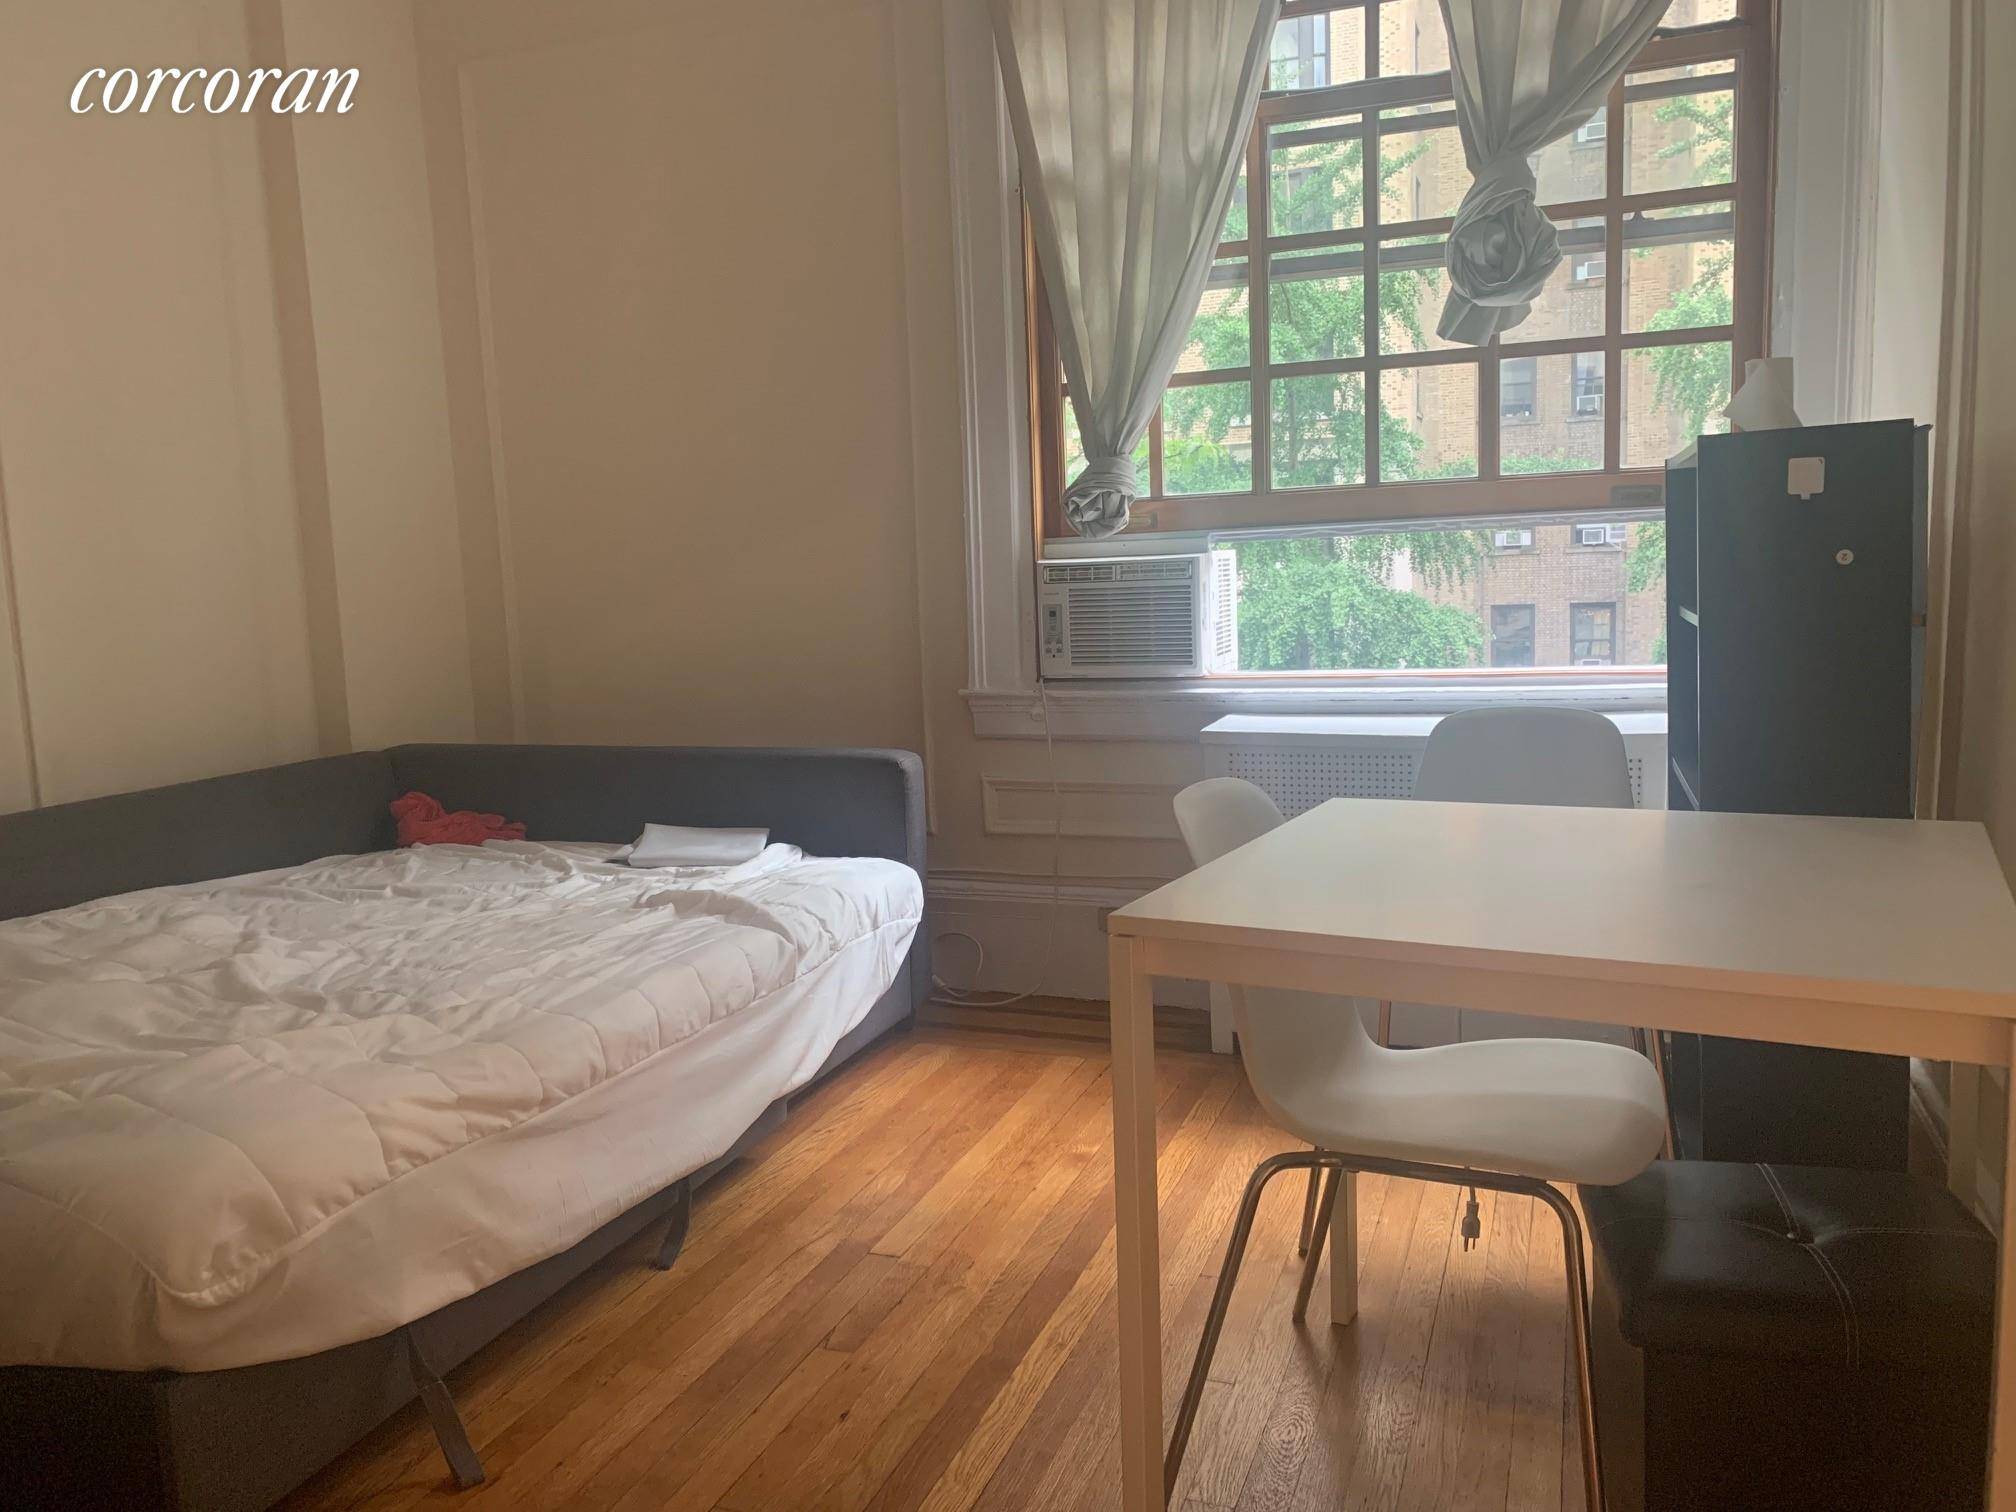 AVAILABLE FOR OCTOBER ELEVATOR BUILDING PART TIME DOORMAN ON SITE LAUNDRY LIVE IN RESIDENT MANAGER Gorgeous 2 BEDROOM apartment only 5 blocks to Columbia University.